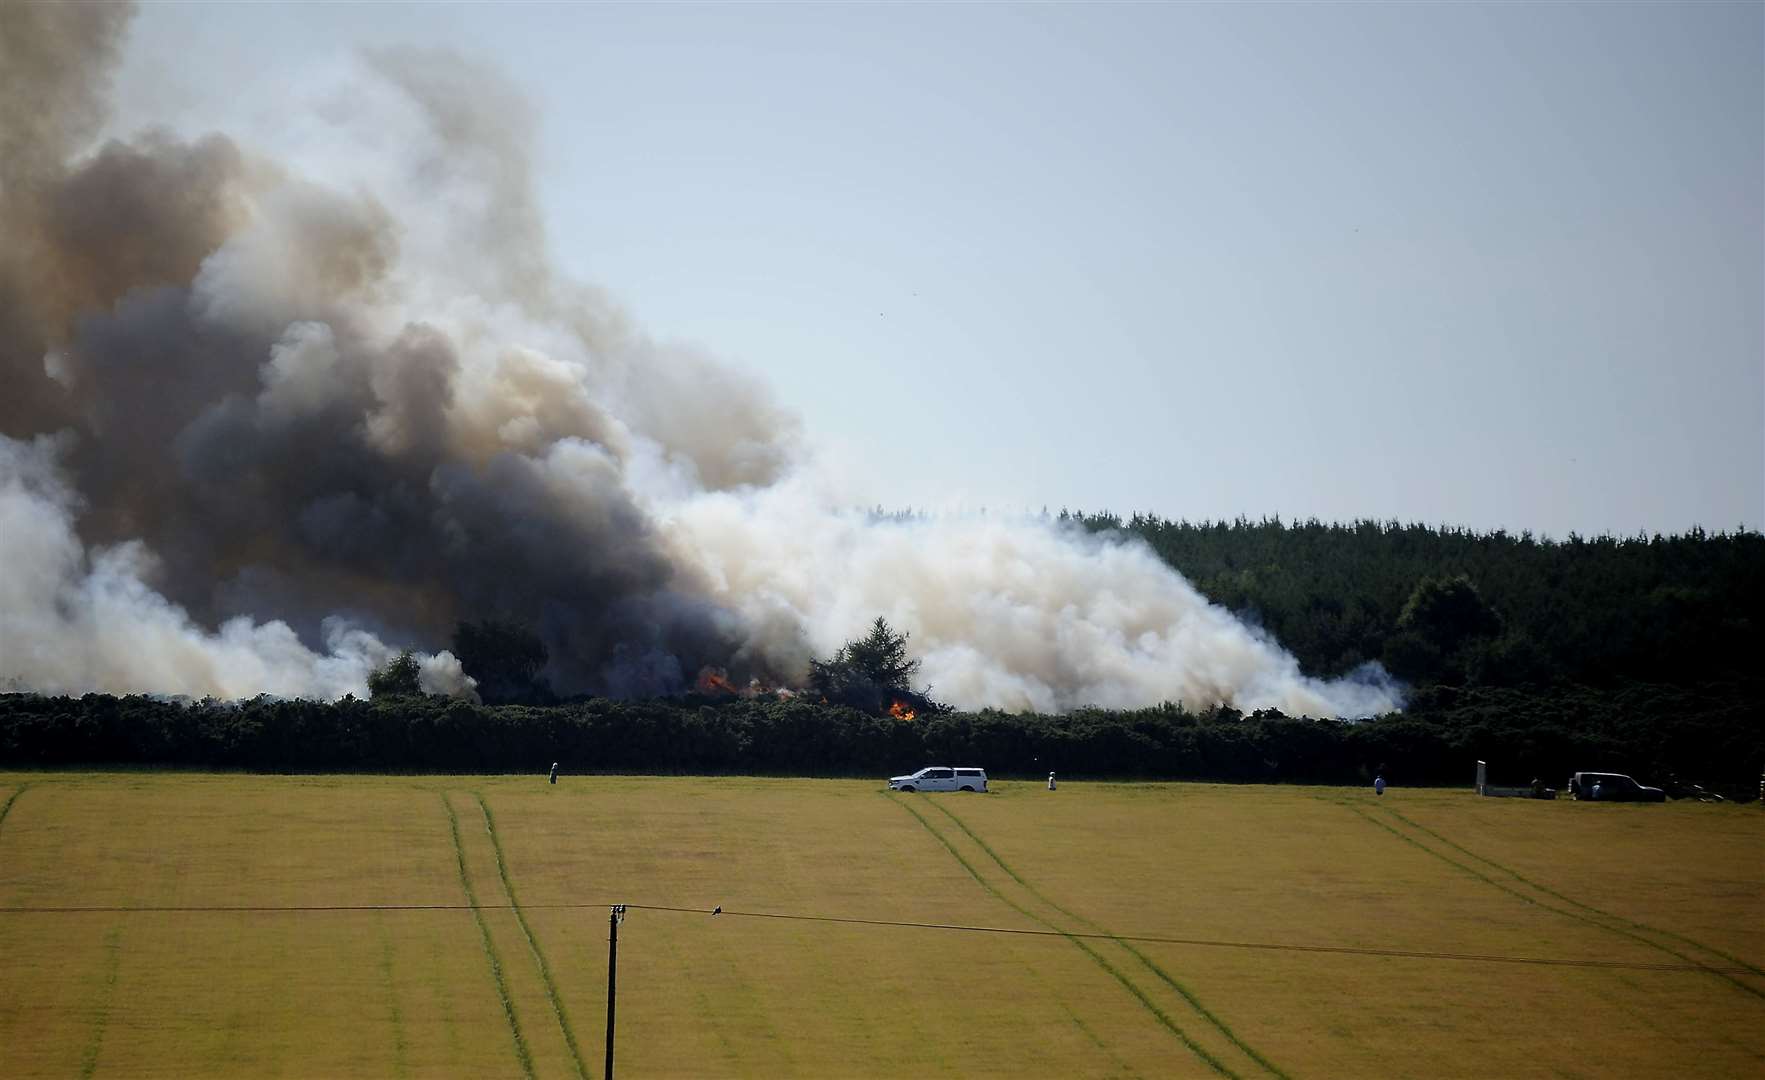 The large tree and gorse fire near Thomshill, Elgin. Picture: Highland News and Media